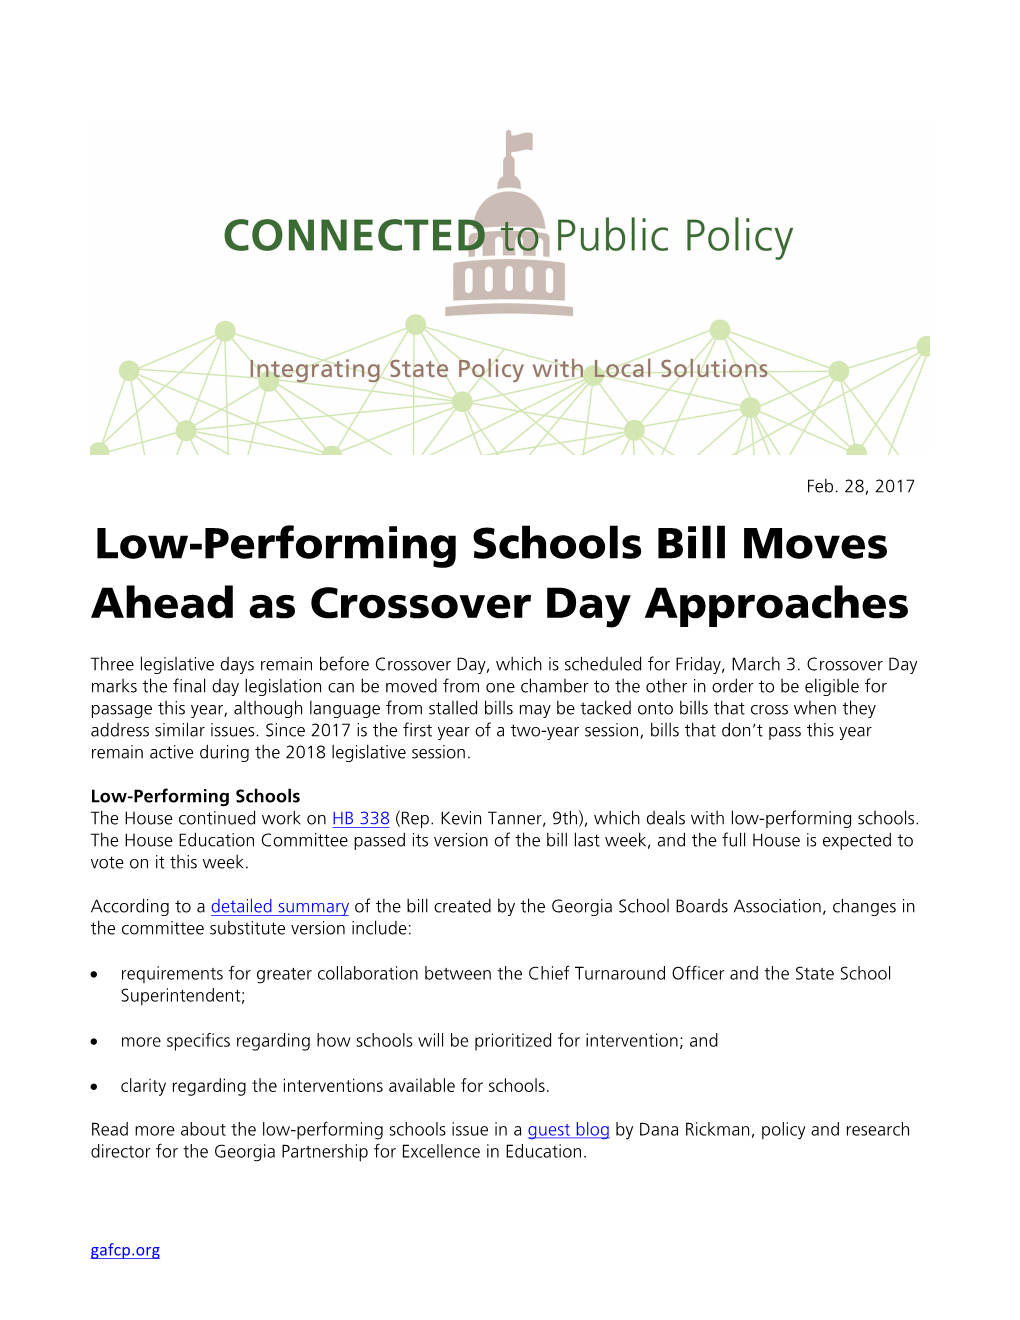 Low-Performing Schools Bill Moves Ahead As Crossover Day Approaches